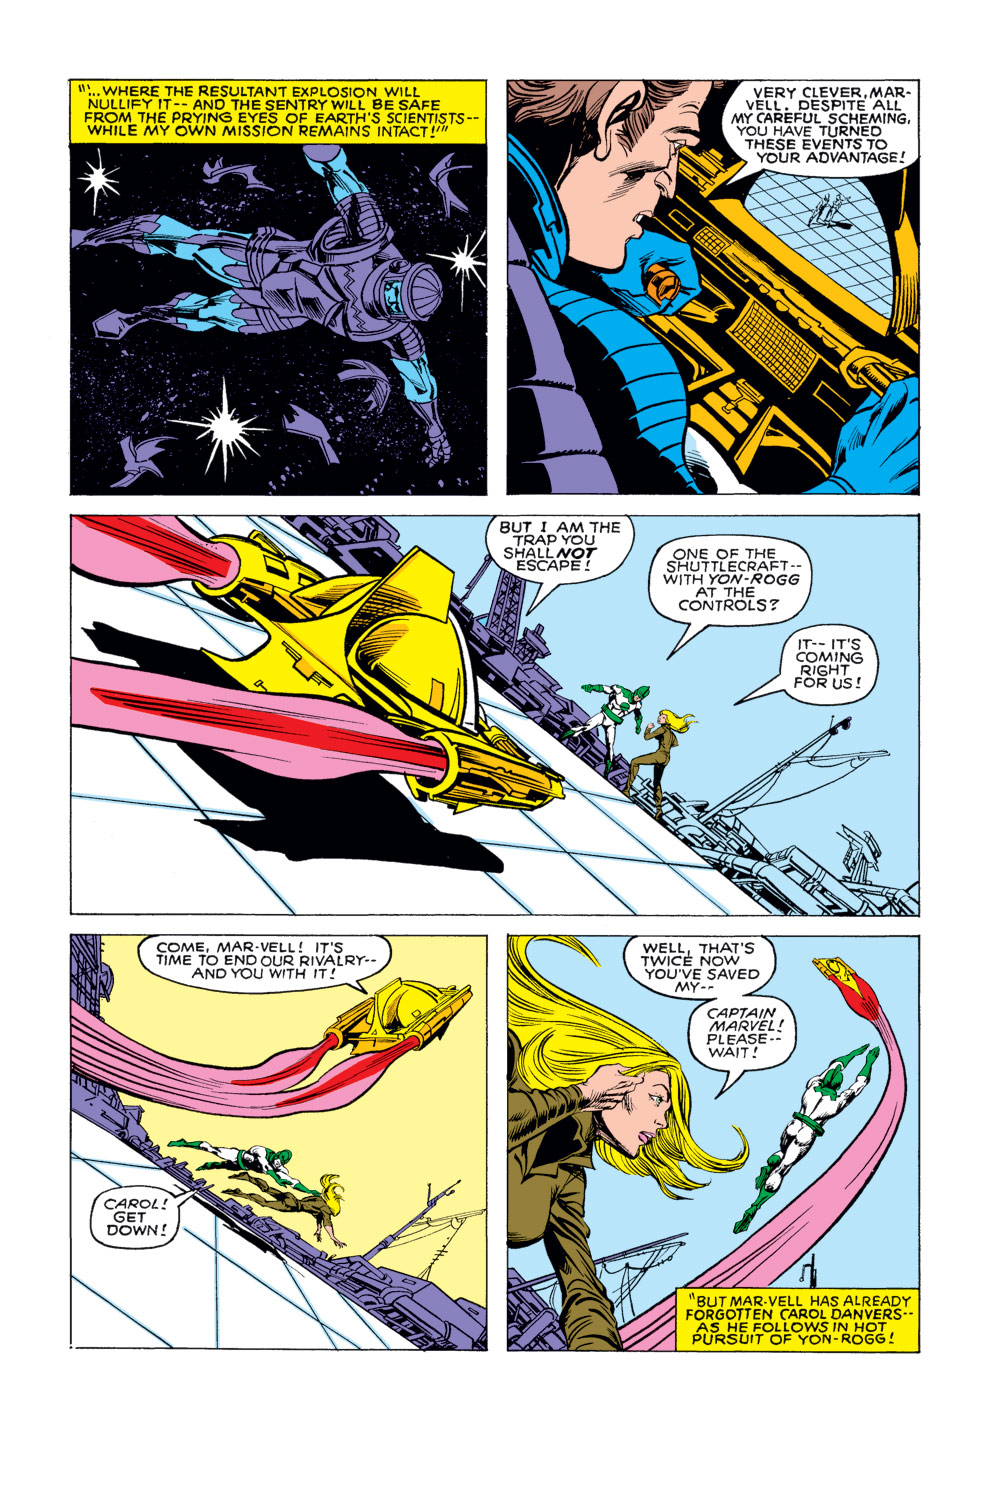 What If? (1977) issue 17 - Ghost Rider, Spider-Woman and Captain Marvel were villains - Page 33